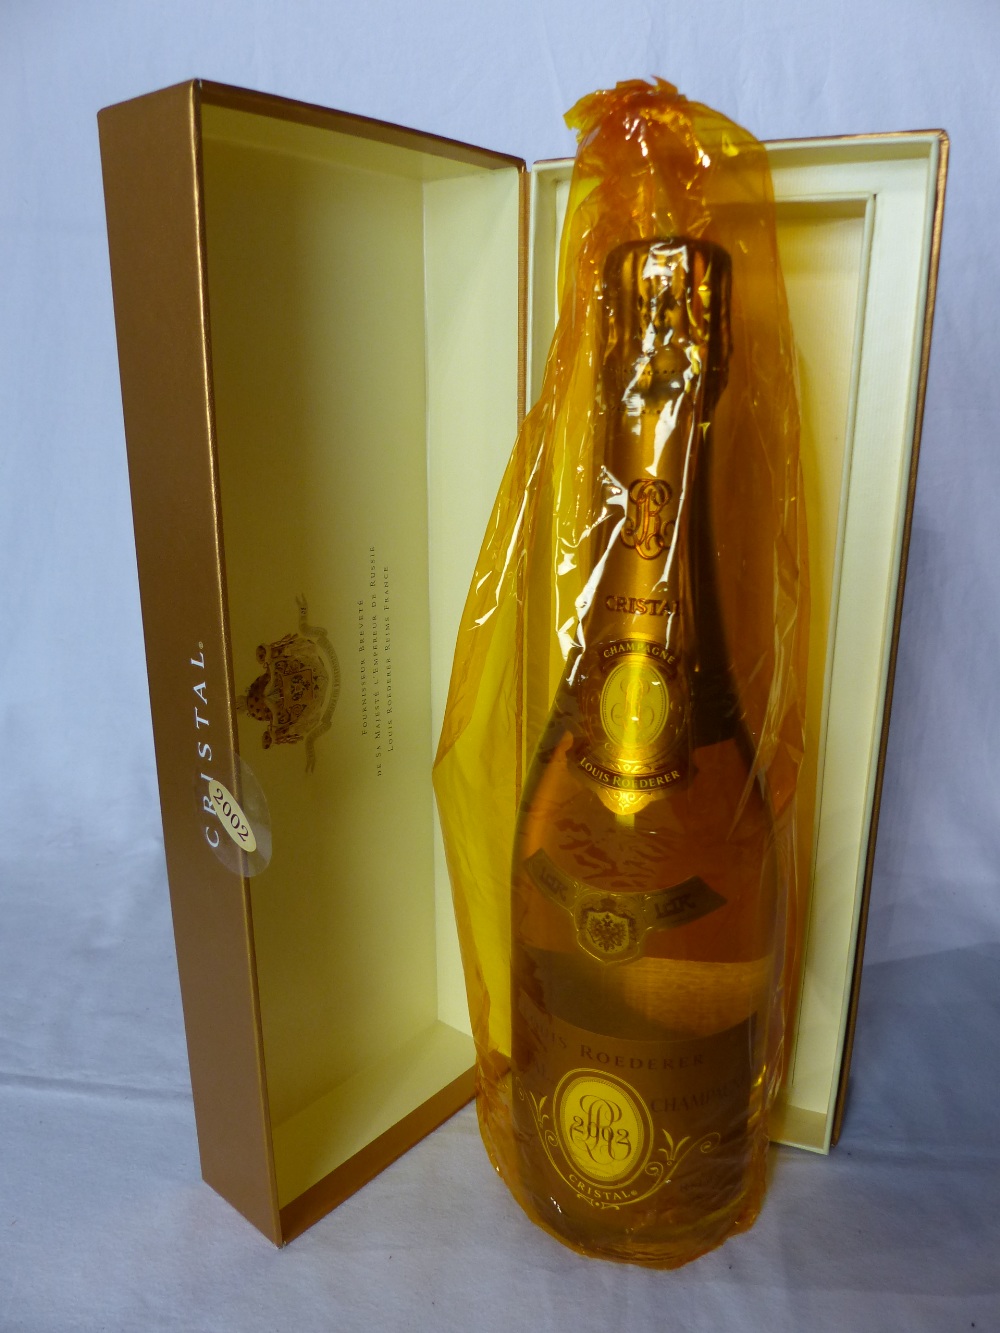 Cristal Louis Roederer Champagne 2002, - Image 2 of 6